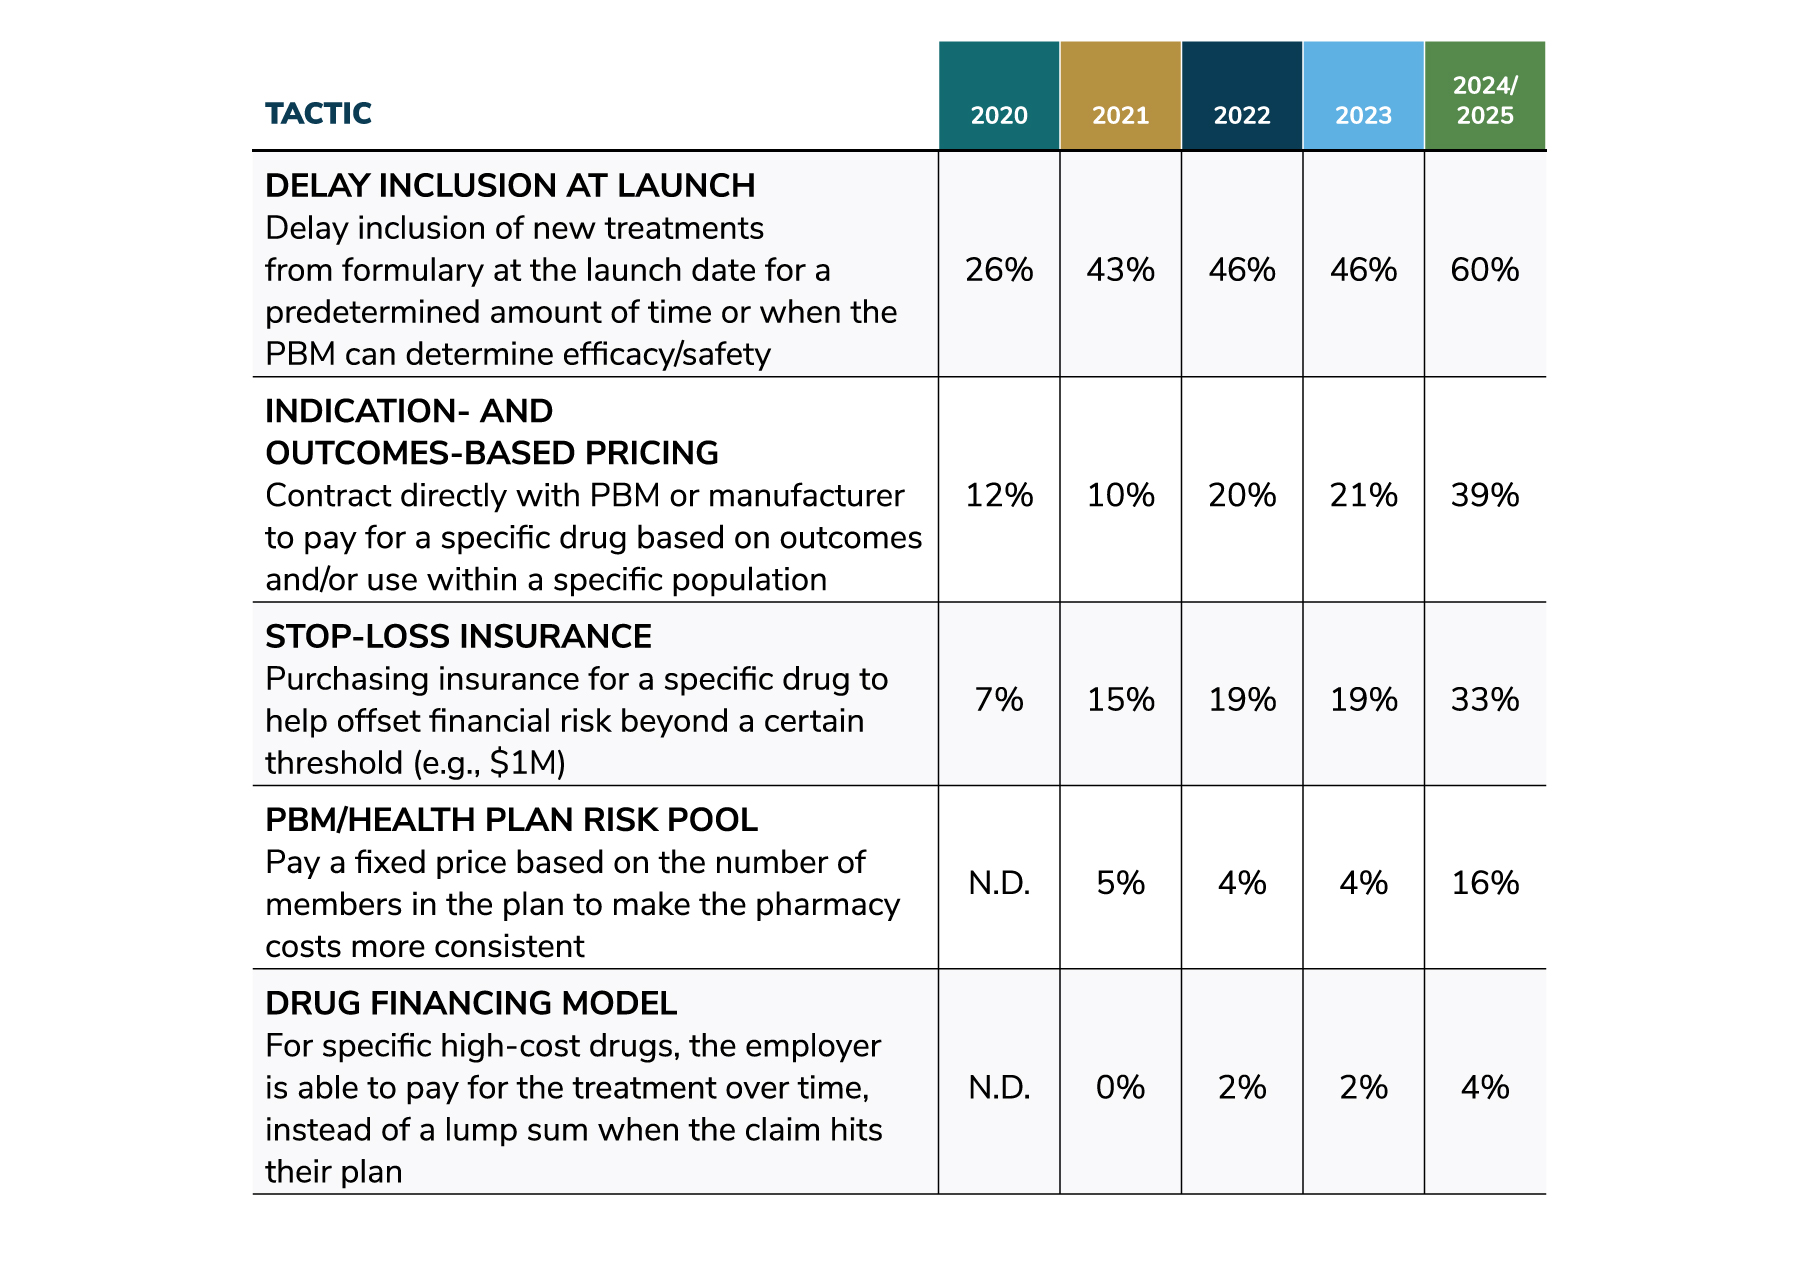 In 2023, 46% of employers will delay the inclusion of new, high-cost drugs on formulary, 21% will use indication- or outcomes-based pricing, and 19% have stop-loss insurance in place for specific drugs.